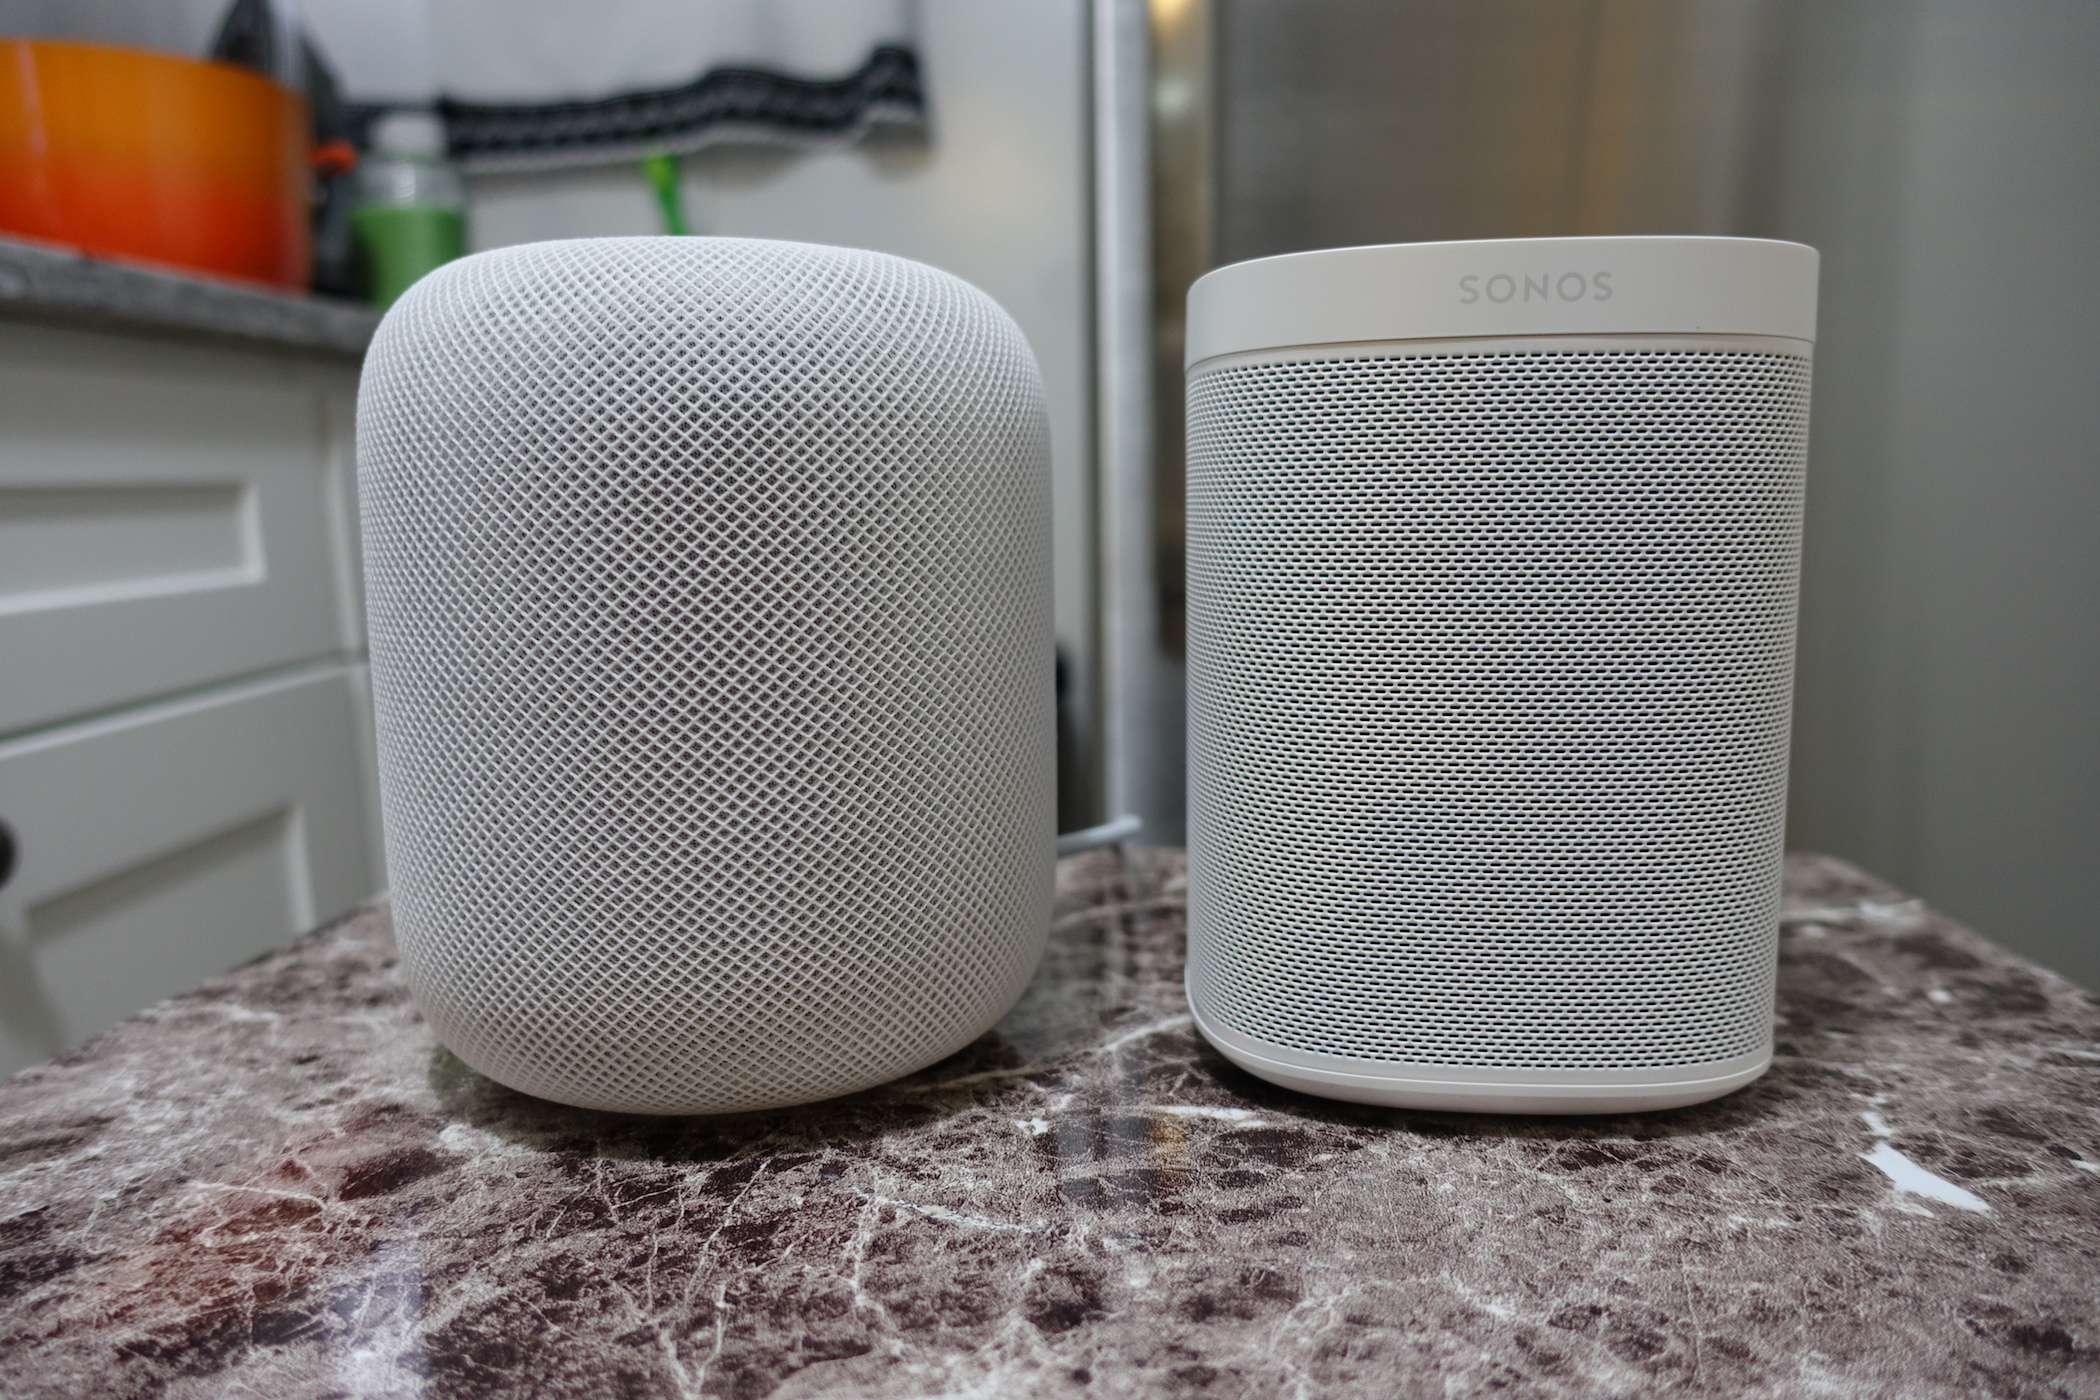 HomePod: Paying $350 for speaker that says “no” this much is tough | Ars Technica